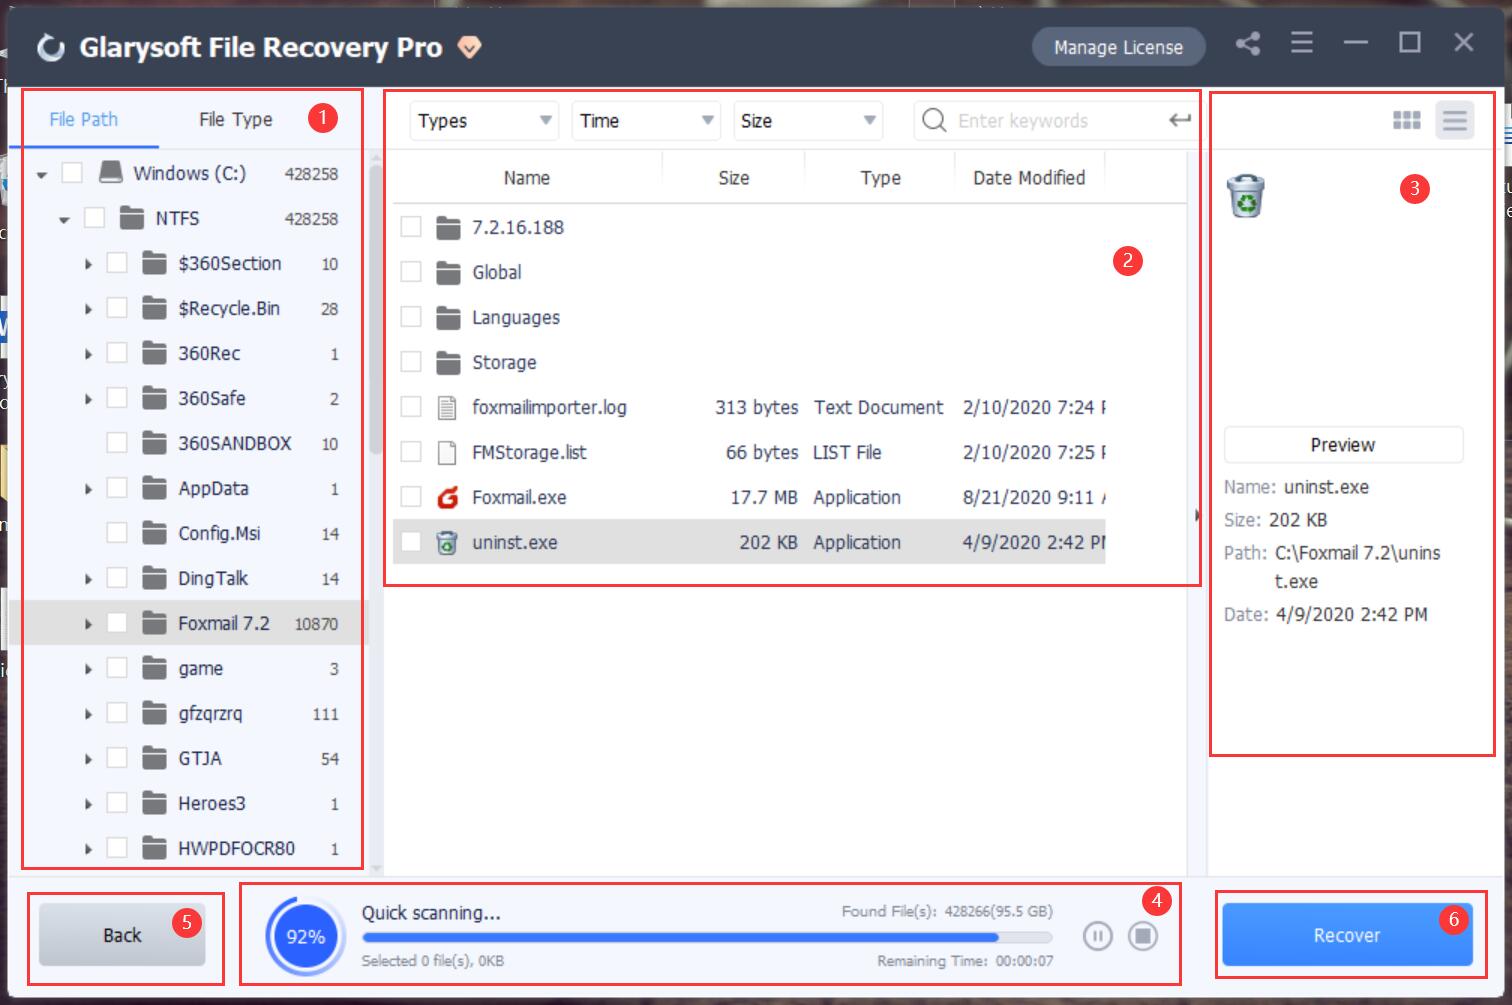 download the new for windows Glarysoft File Recovery Pro 1.22.0.22